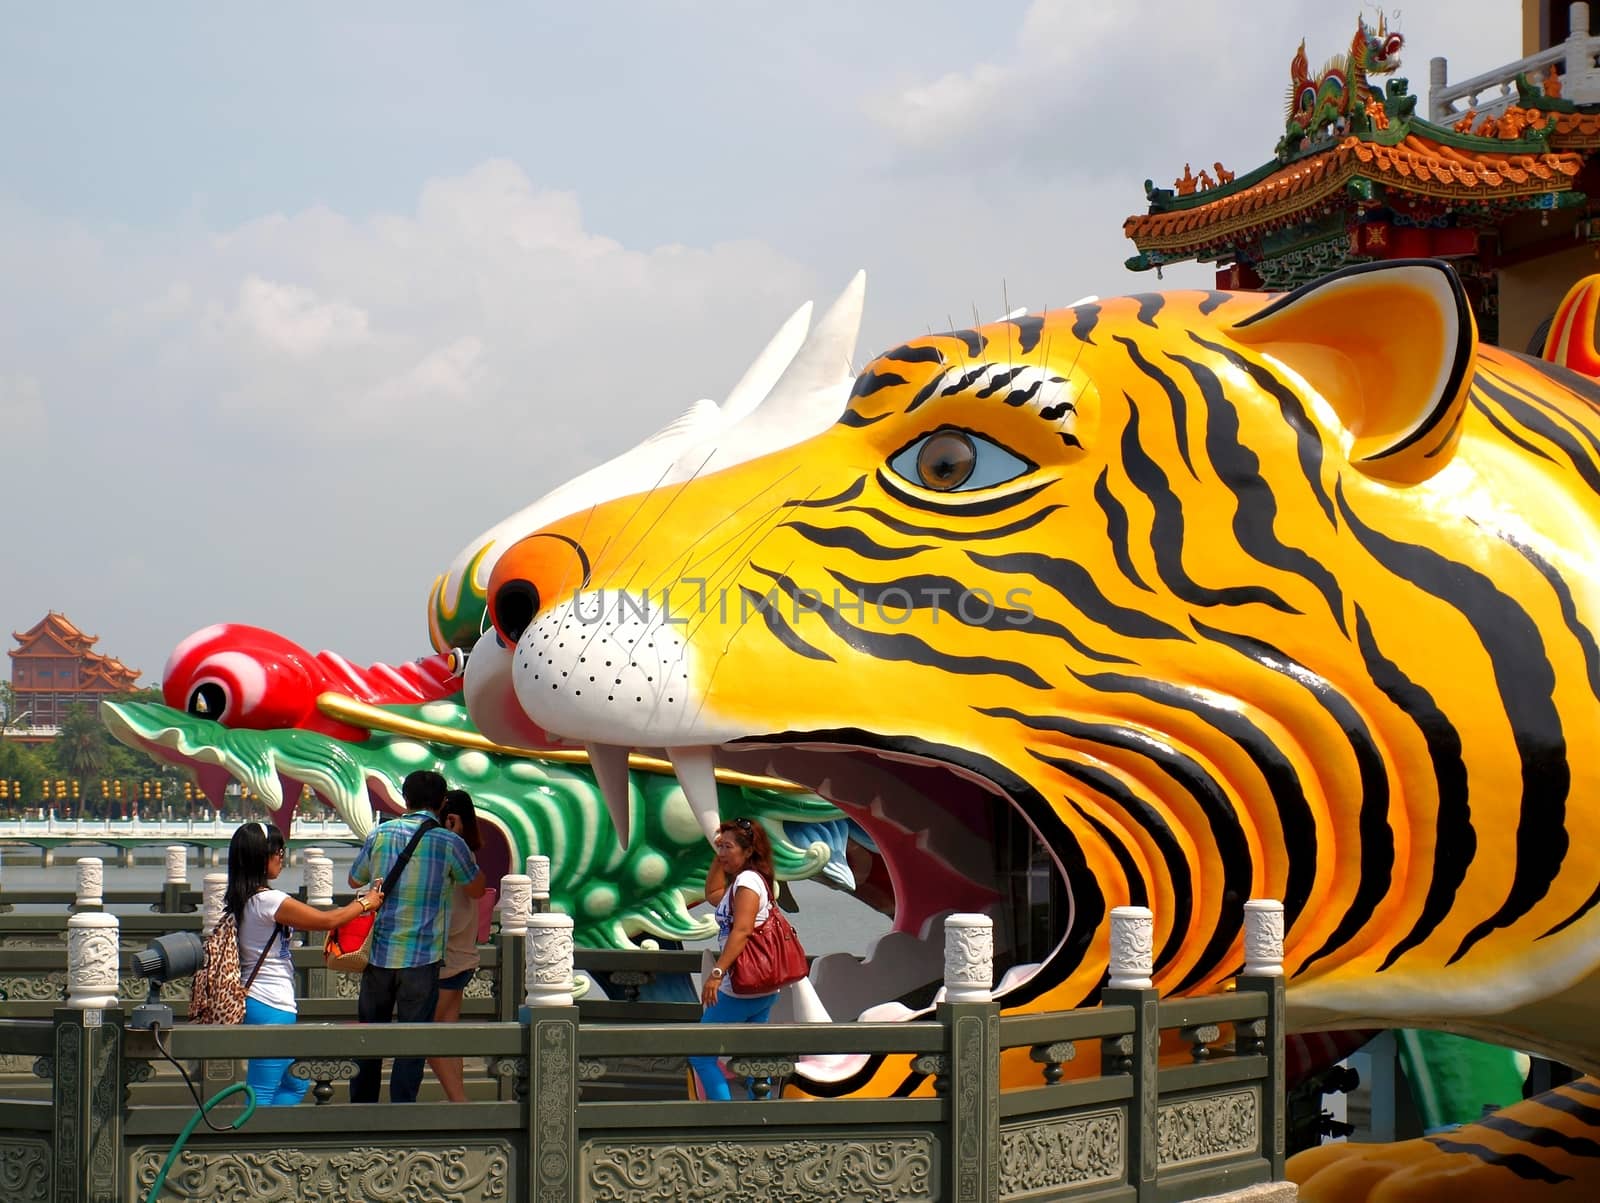 KAOHSIUNG, TAIWAN -- OCTOBER 13: Visitors emerge from the famous Tiger Pagoda at the yearly Wannian Folklore Festival on October 13, 2013 in Kaohsiung.
